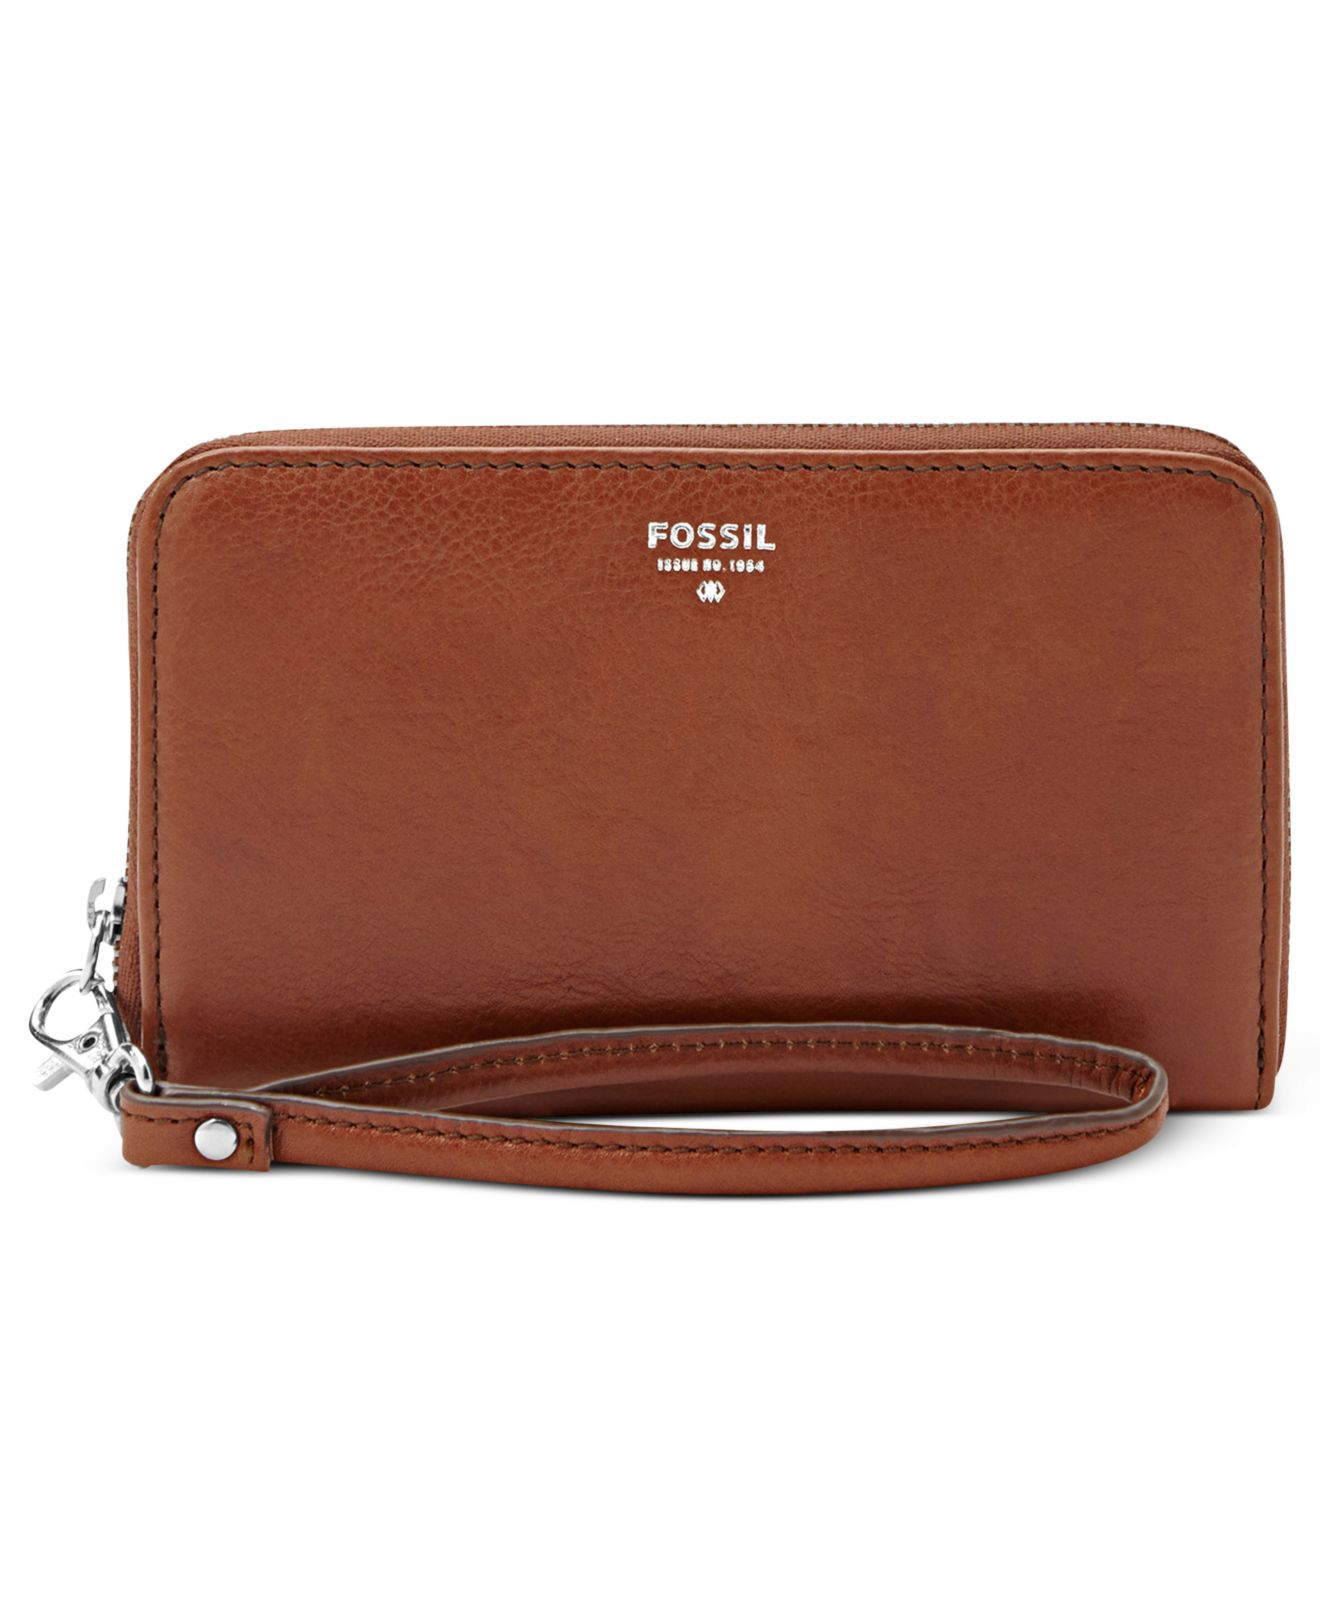 Fossil Sydney Leather Zip Phone Wallet in Red - Lyst